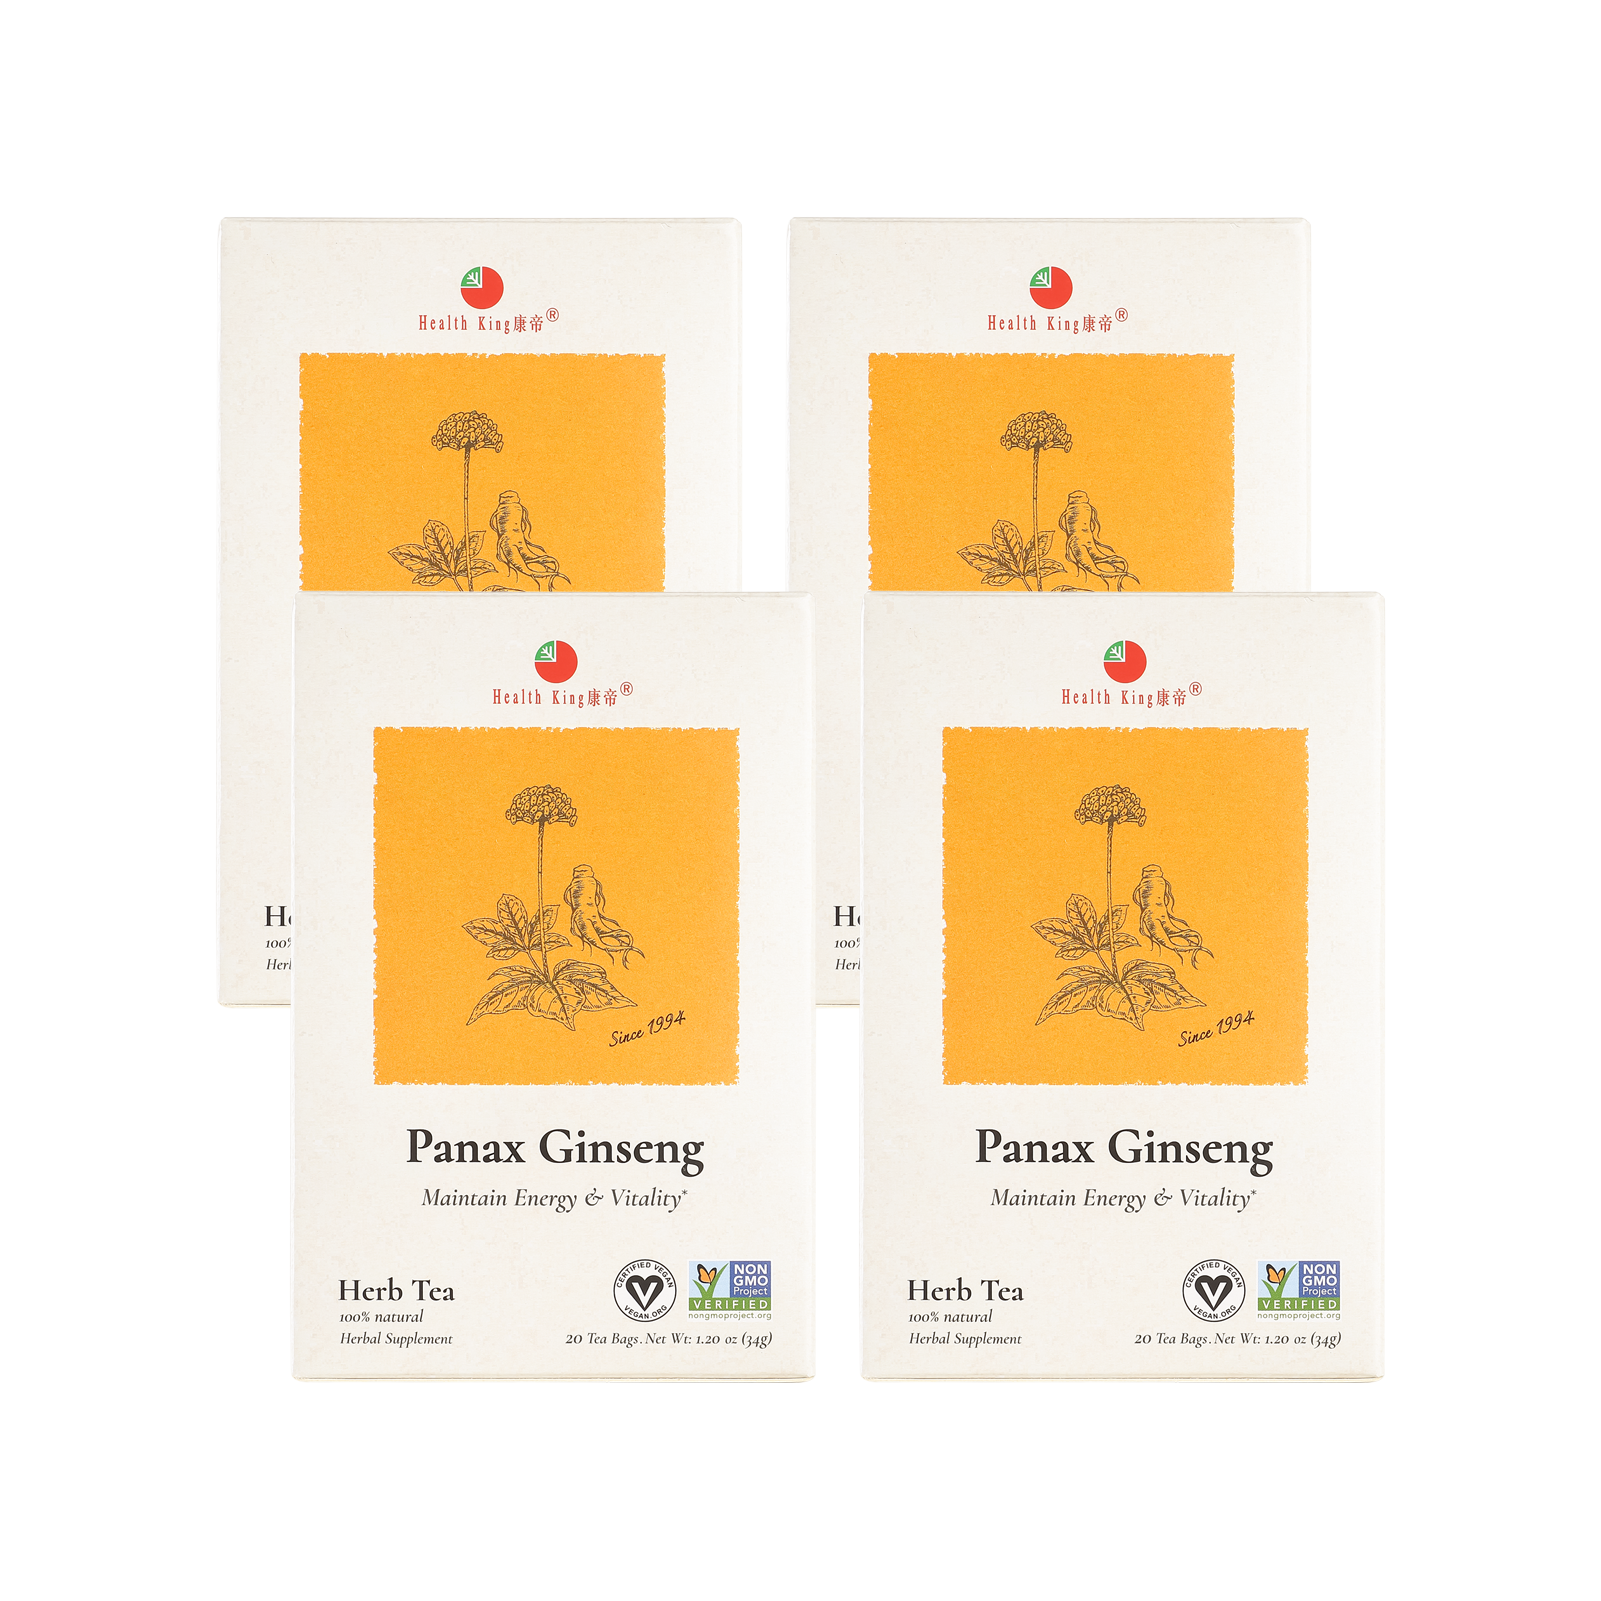 Four boxes of Panax Ginseng Herb Tea to maintain daily energy levels